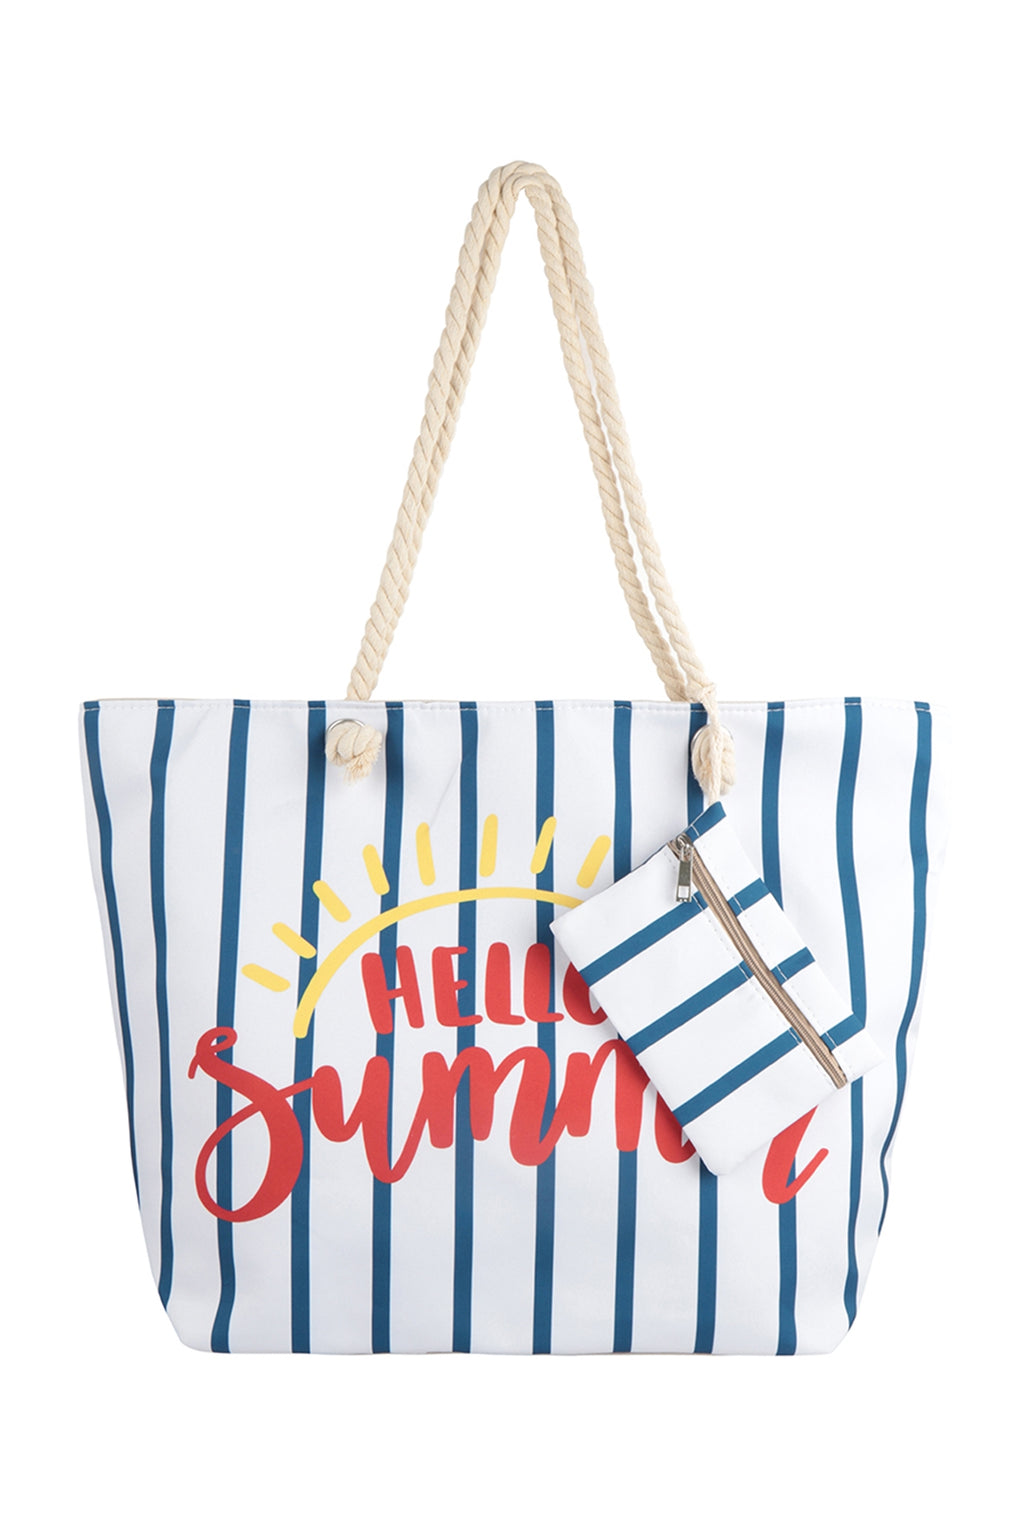 Hello Summer Striped Tote Bag with Matching Wallet Navy - Pack of 6